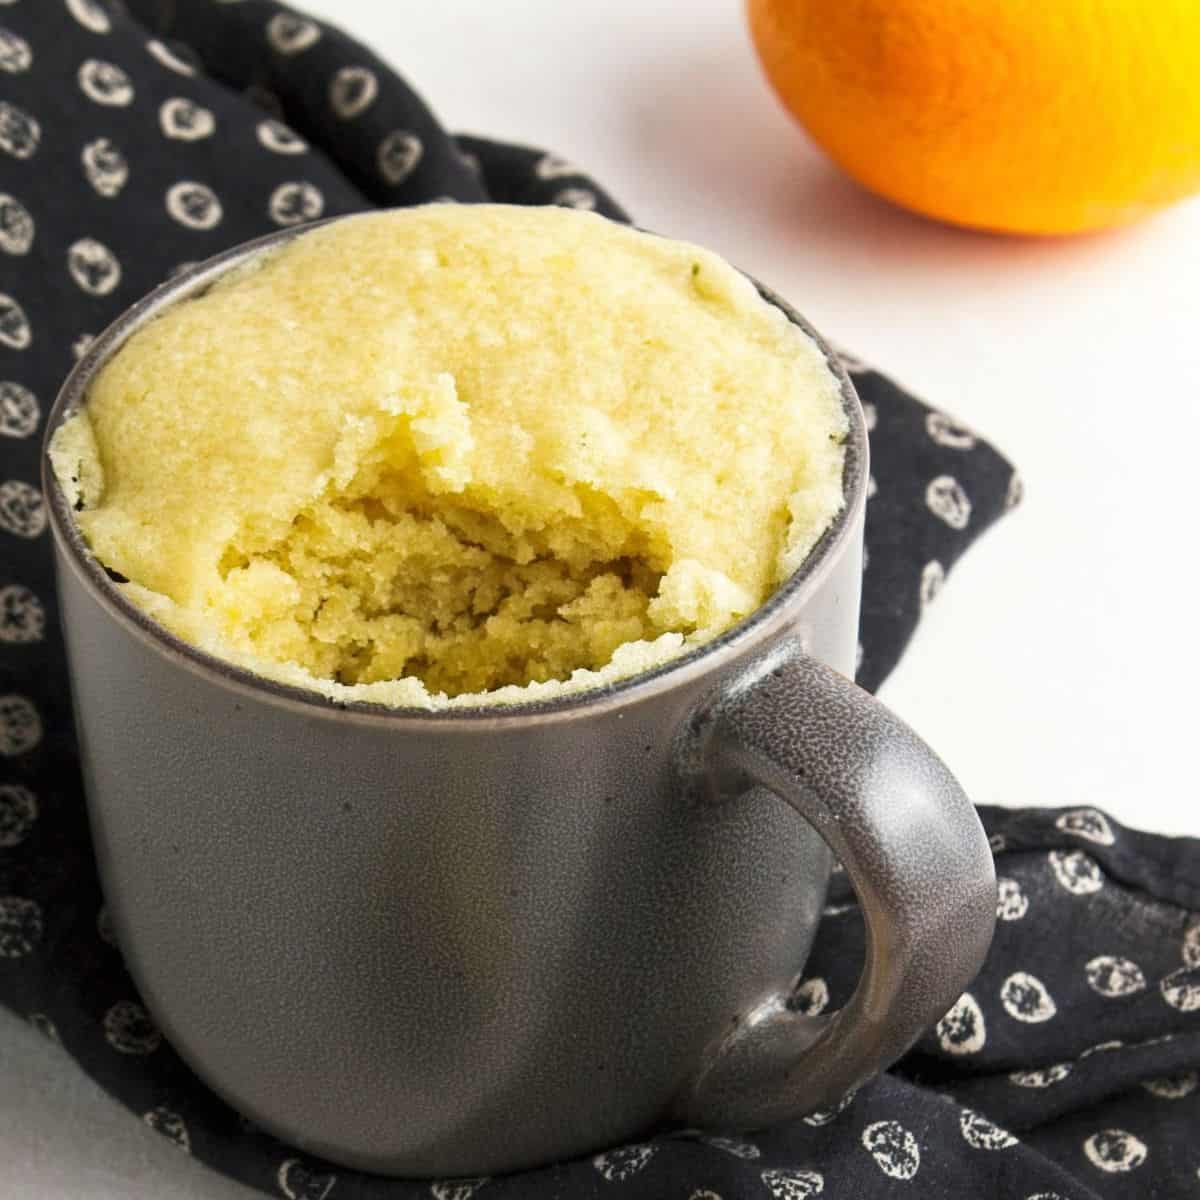 Mediterranean Diet Mug Cake, a six ingredient dessert or snack recipe for one made with olive oil and no dairy. Vegan, Vegetarian.